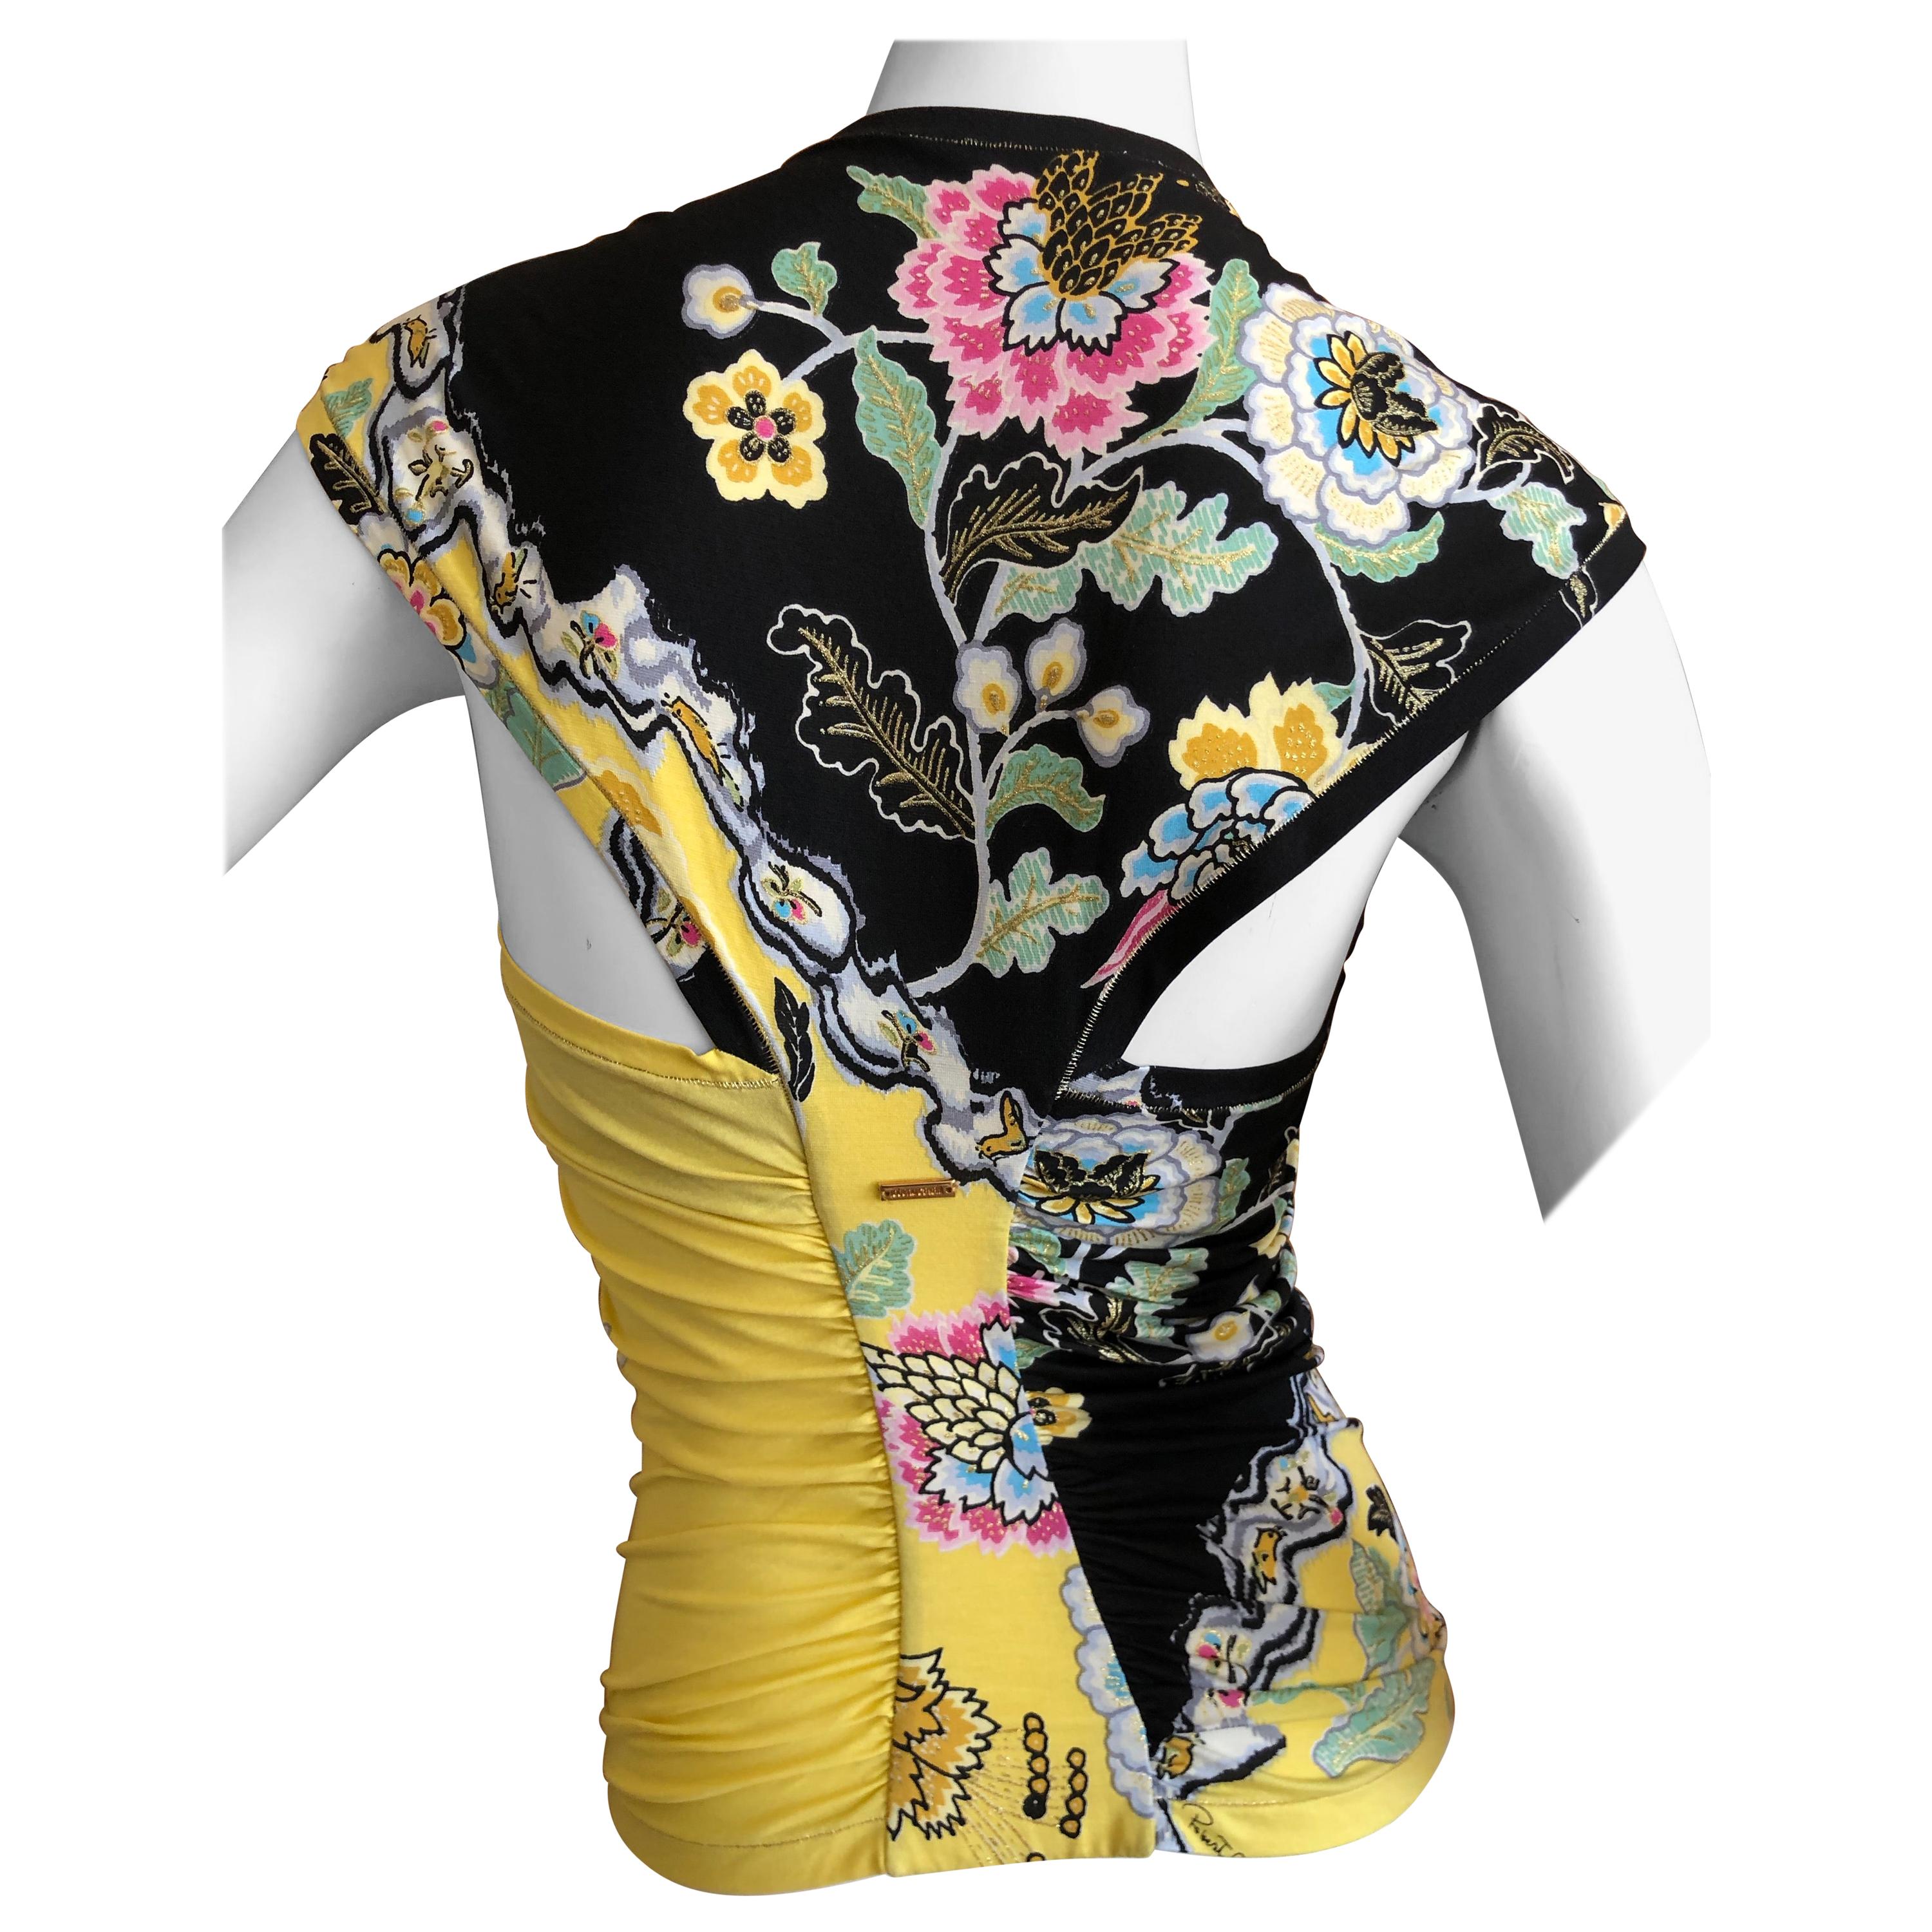 Roberto Cavalli Spring 2003 Silk Chinoiserie Style Floral Top  For Sale